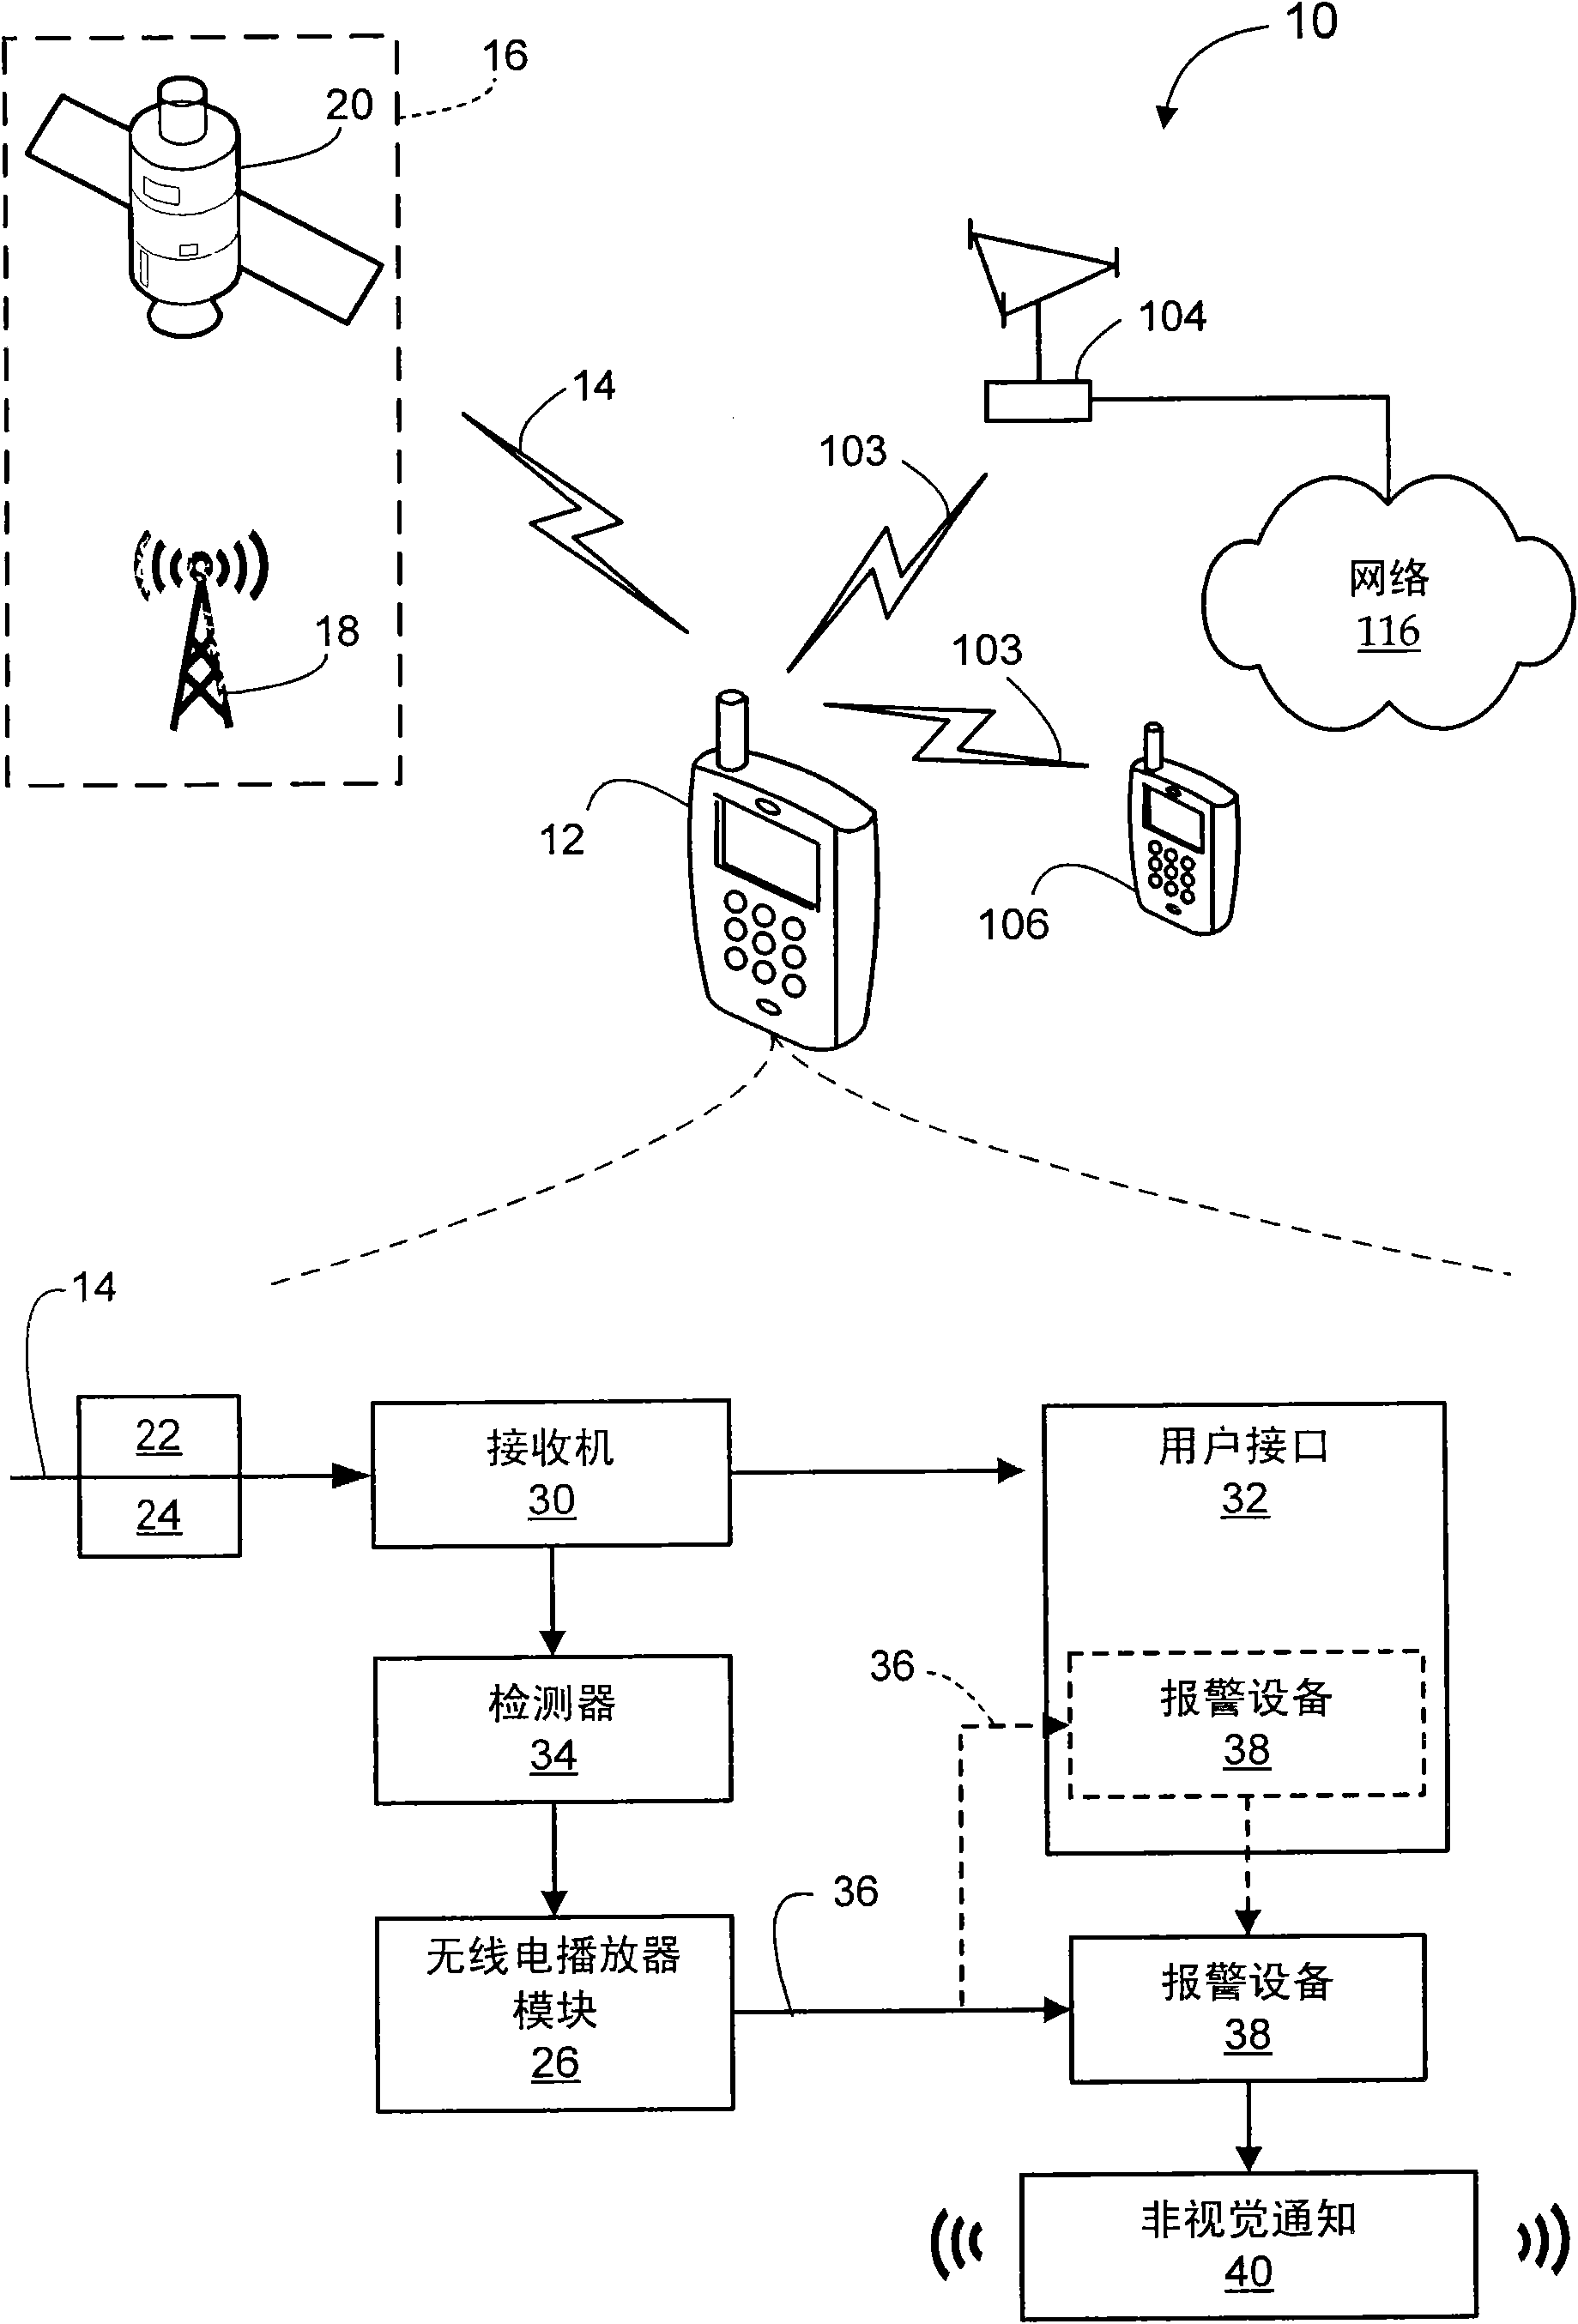 Device and methods of providing radio data system information alerts